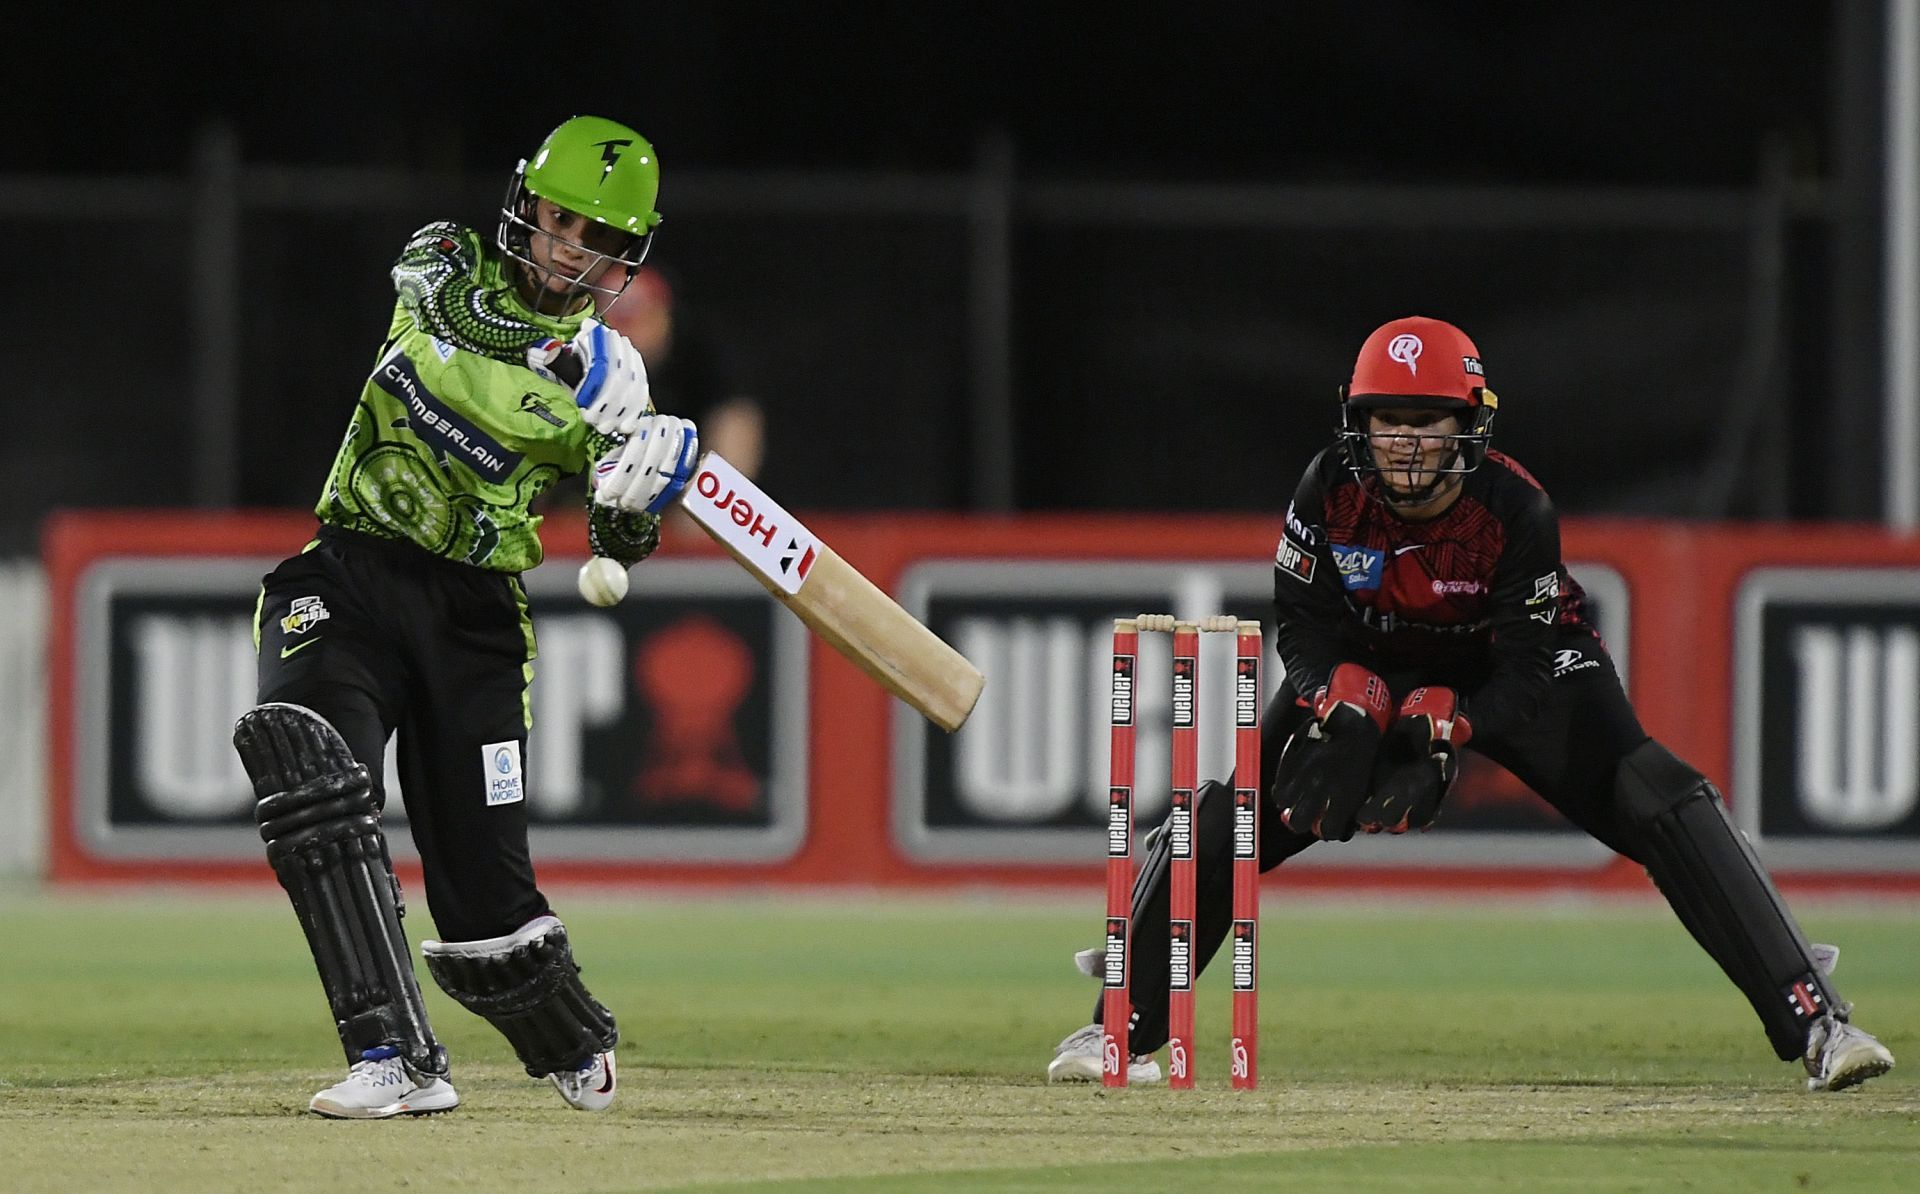 Smriti Mandhana has featured in the BBL. (Pic: Getty Images)